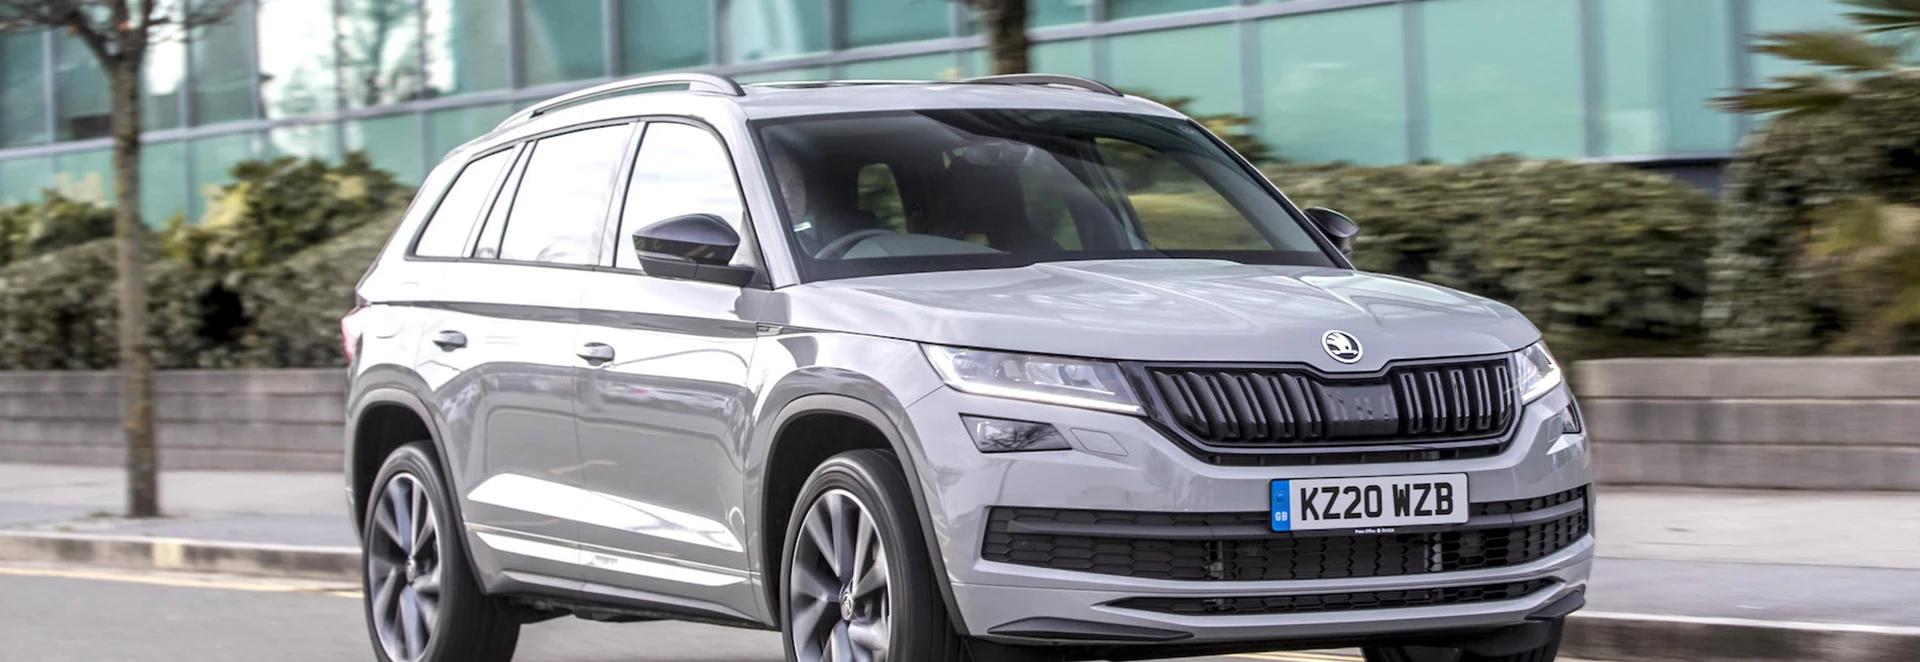 Here’s what Skoda is doing to make buying a car easier during the coronavirus crisis 